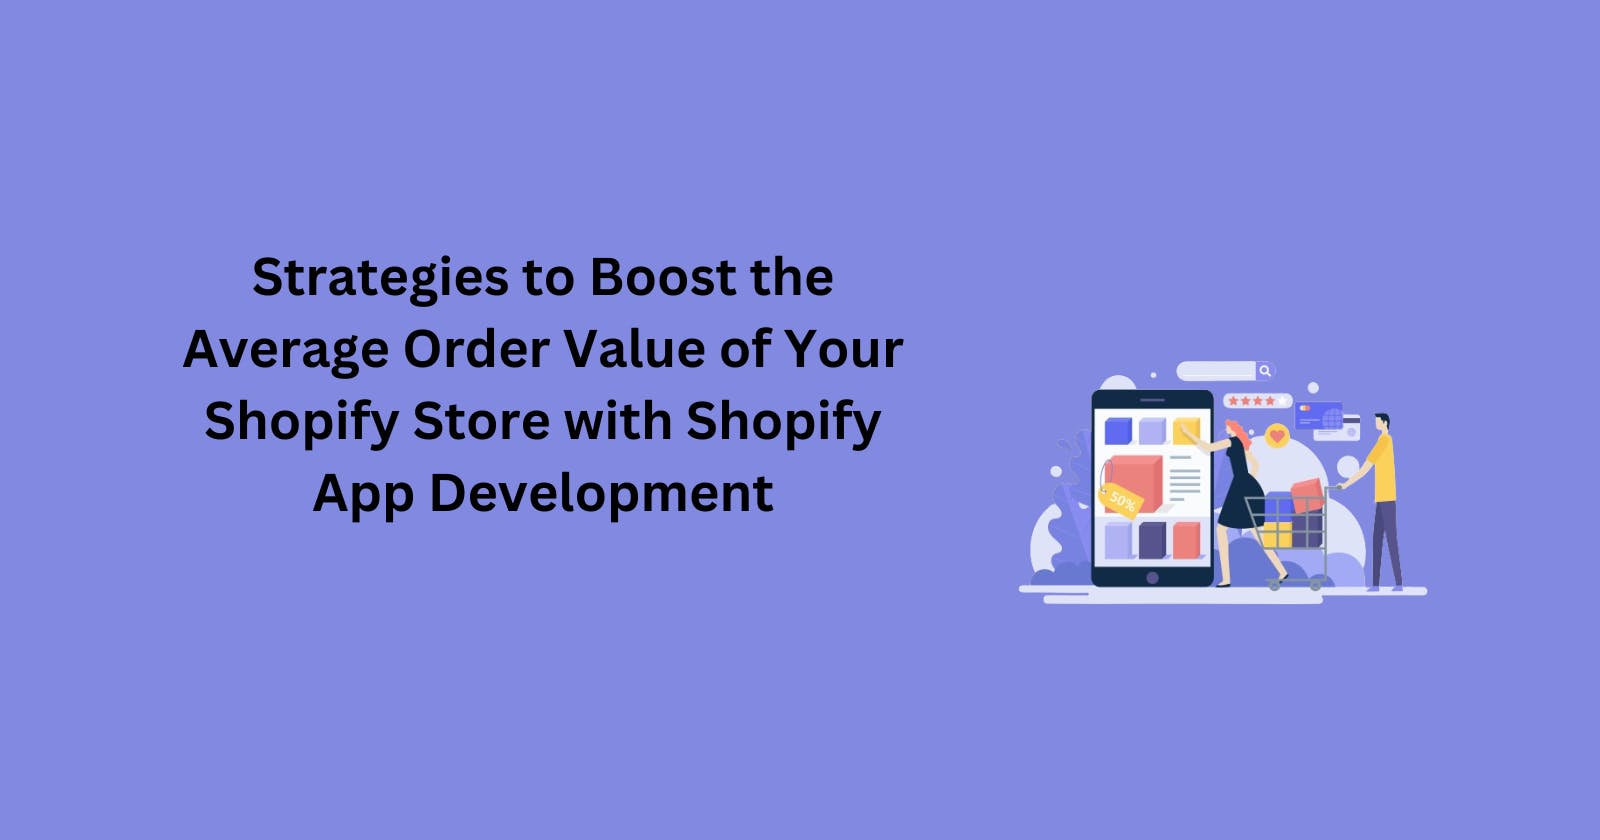 Strategies to Boost the Average Order Value of Your Shopify Store with Shopify App Development